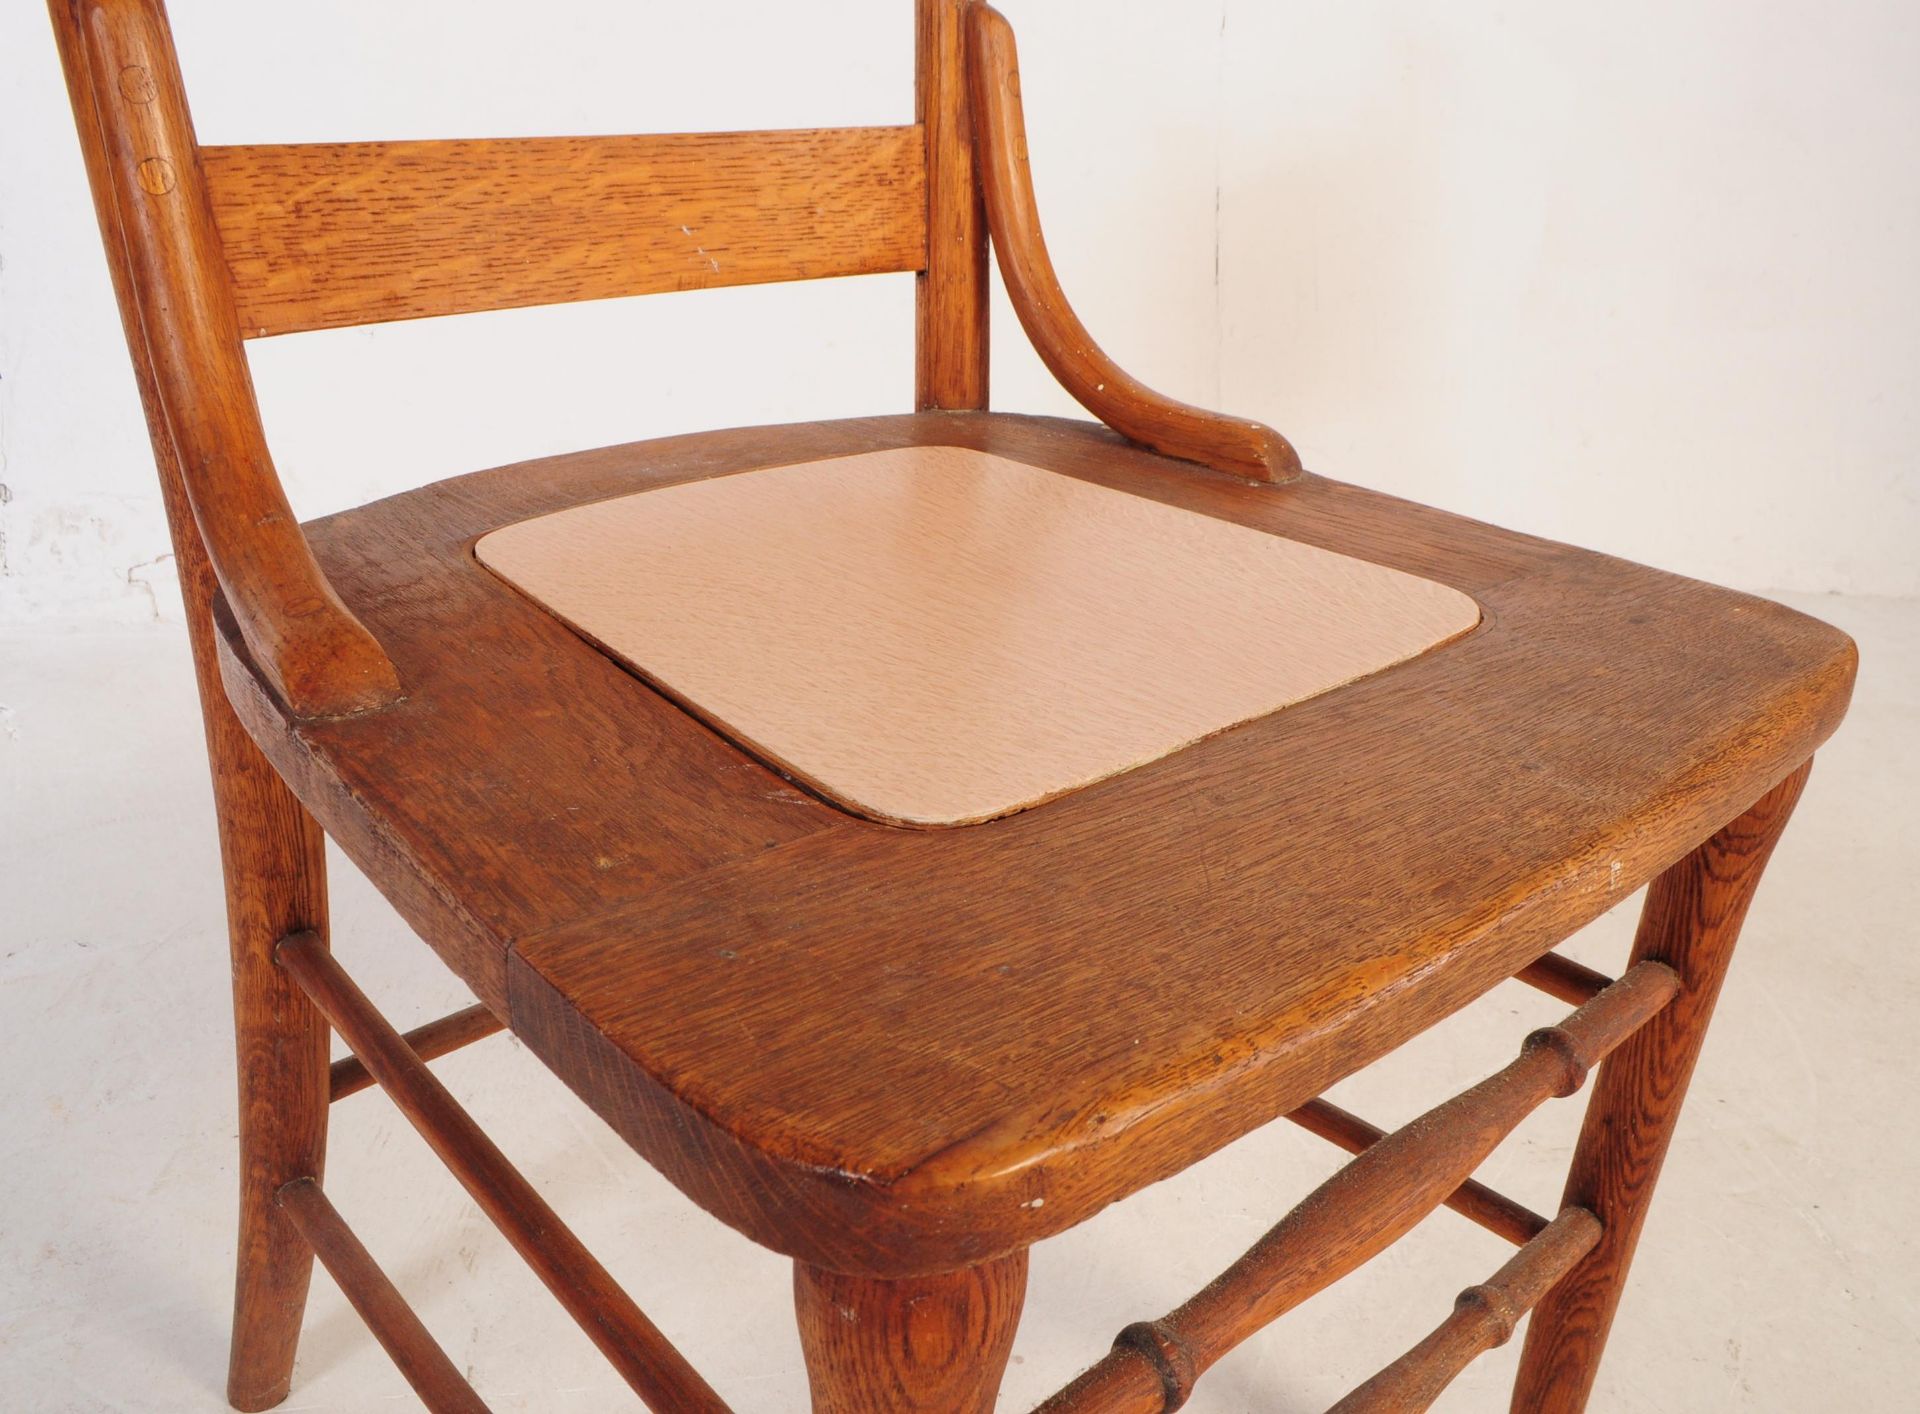 EARLY 20TH CENTURY ARTS & CRAFTS OAK HALL ARMCHAIR - Image 7 of 16